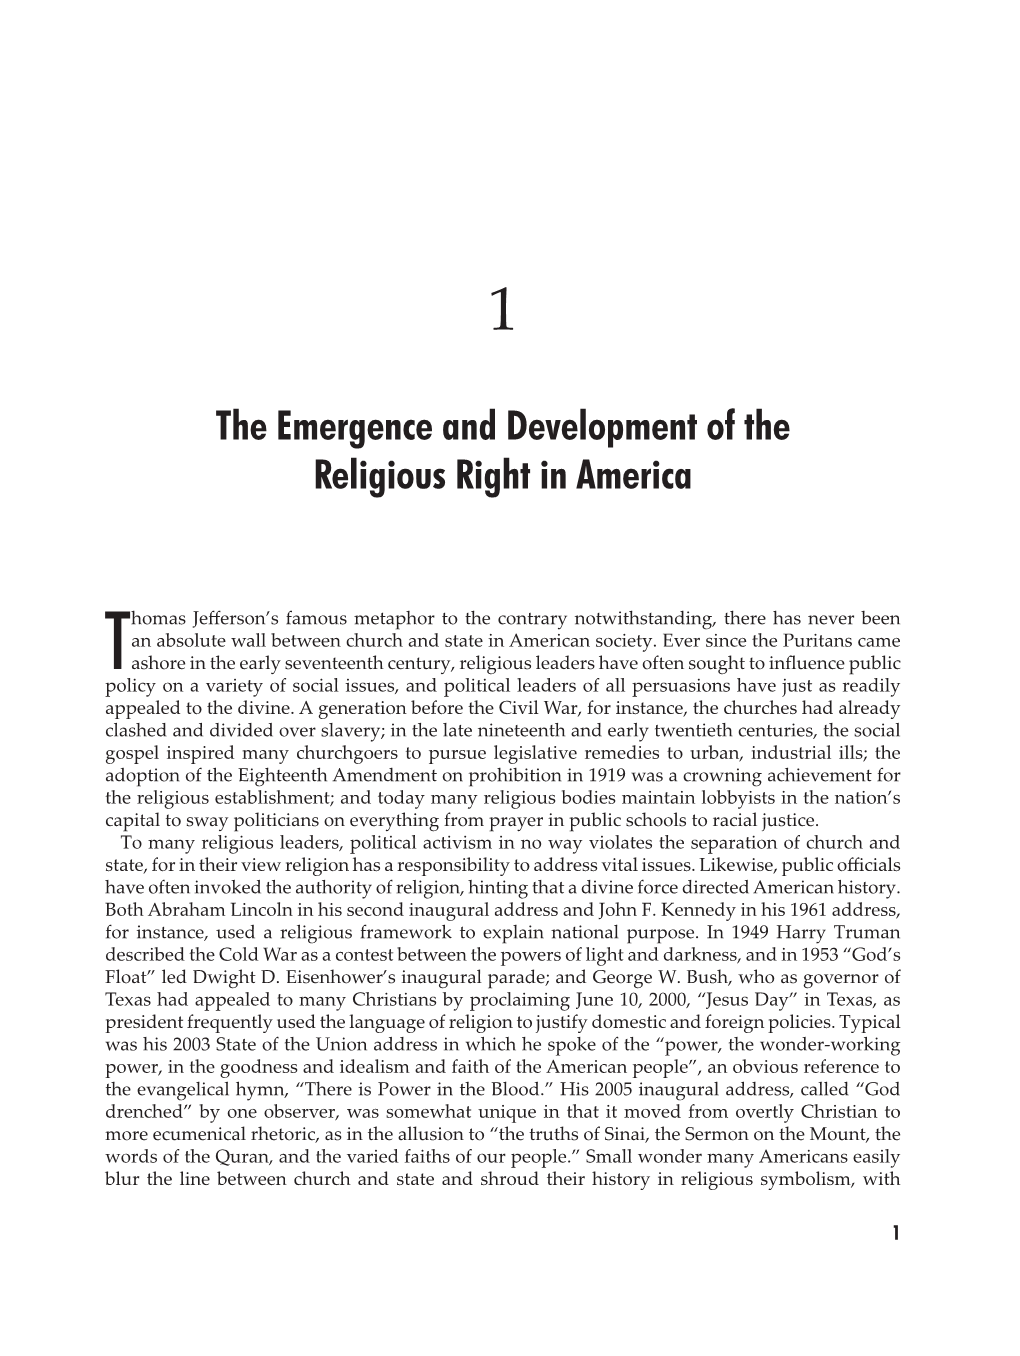 The Emergence and Development of the Religious Right in America